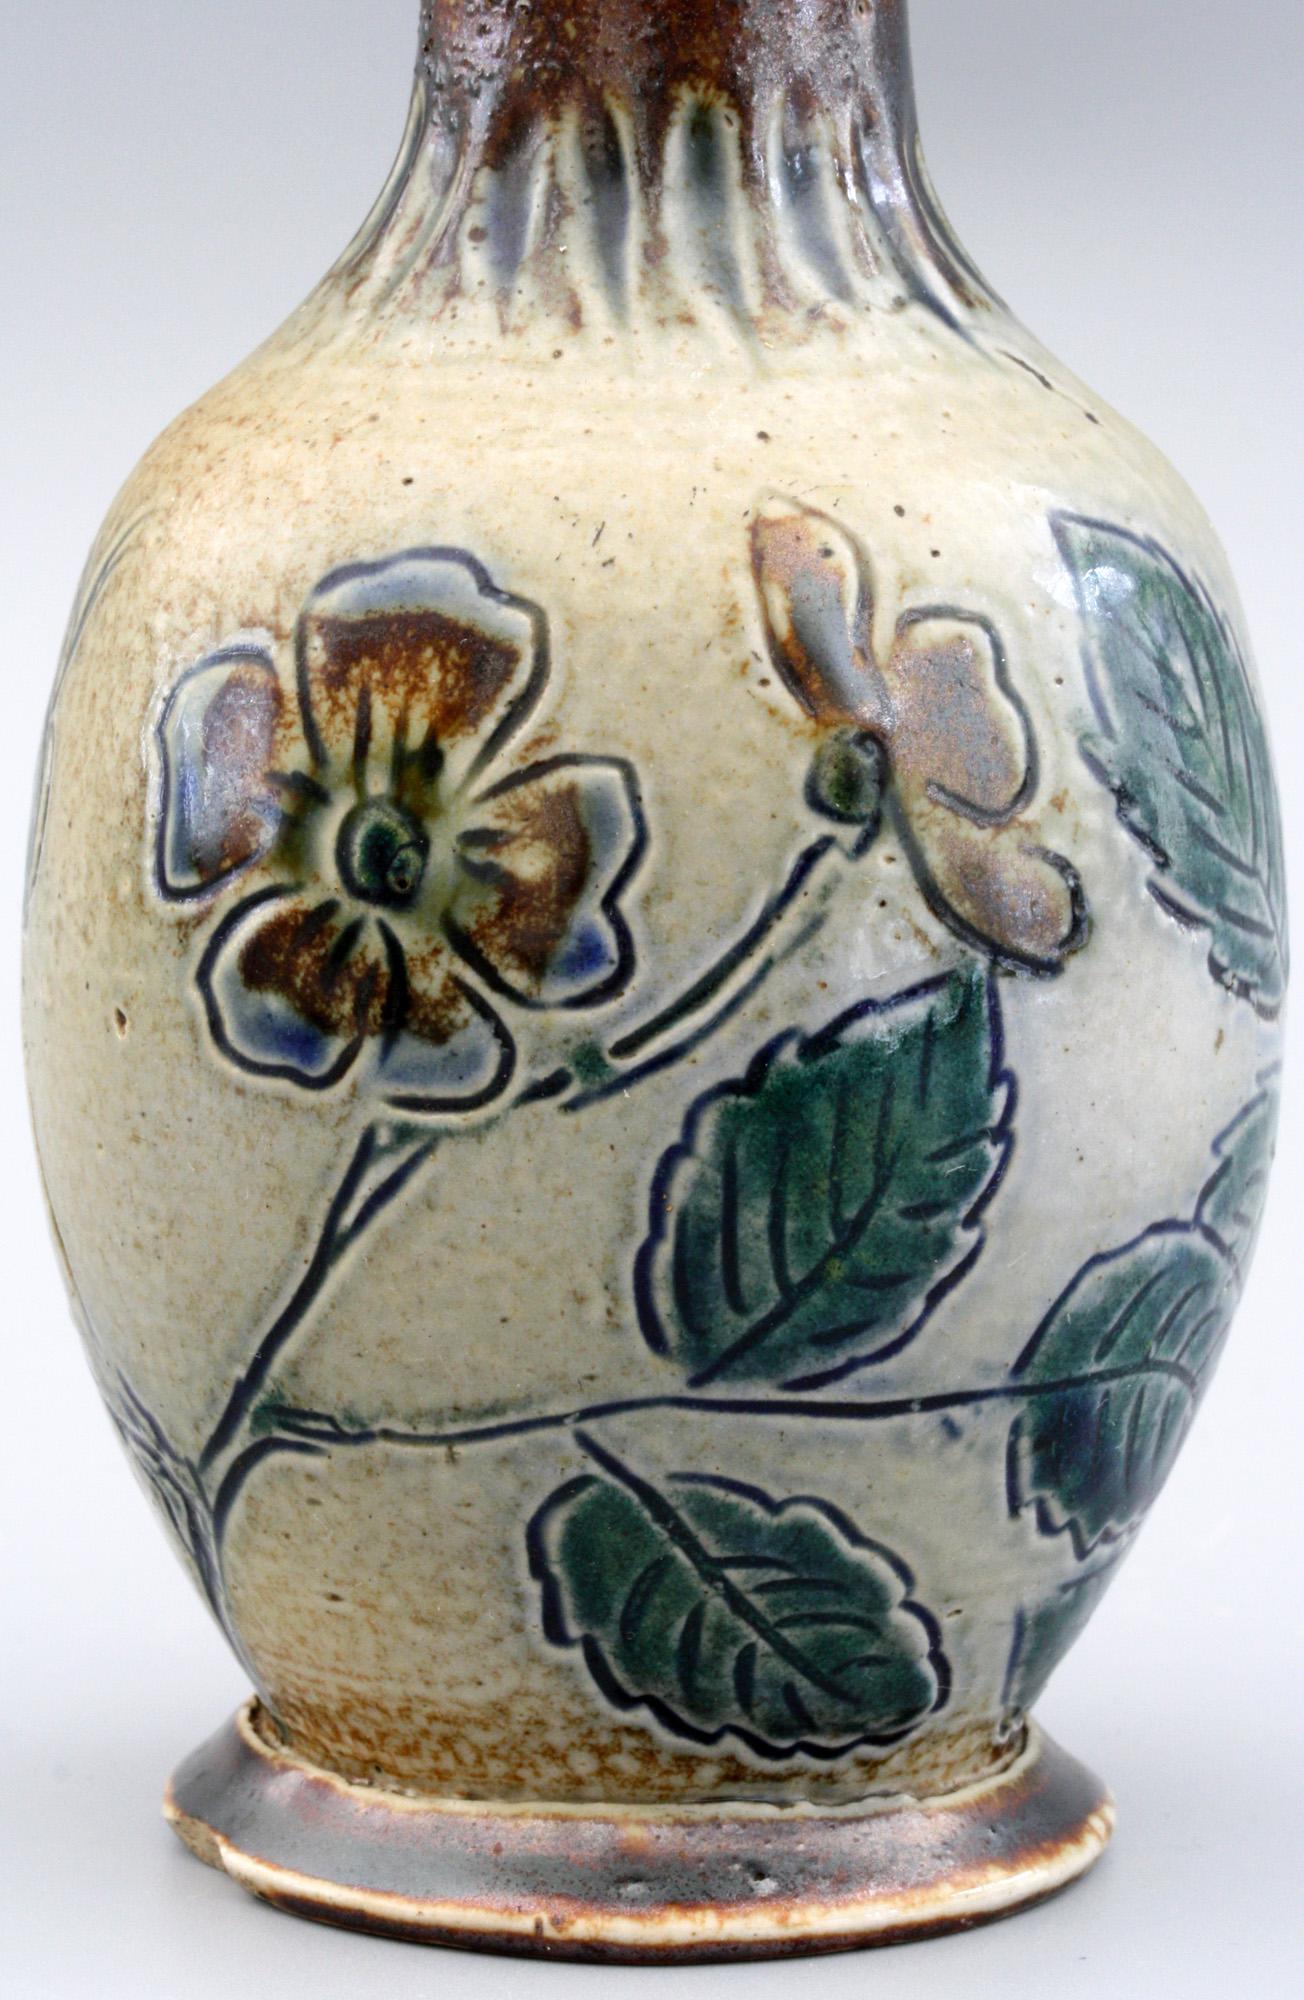 A Martin Brothers stoneware art pottery vase decorated with incised flowering dog roses decorated in brown and blue glazes dating from the 19th century. The small bottle shaped vase stands on a wide rounded foot with a rounded bulbous body and a